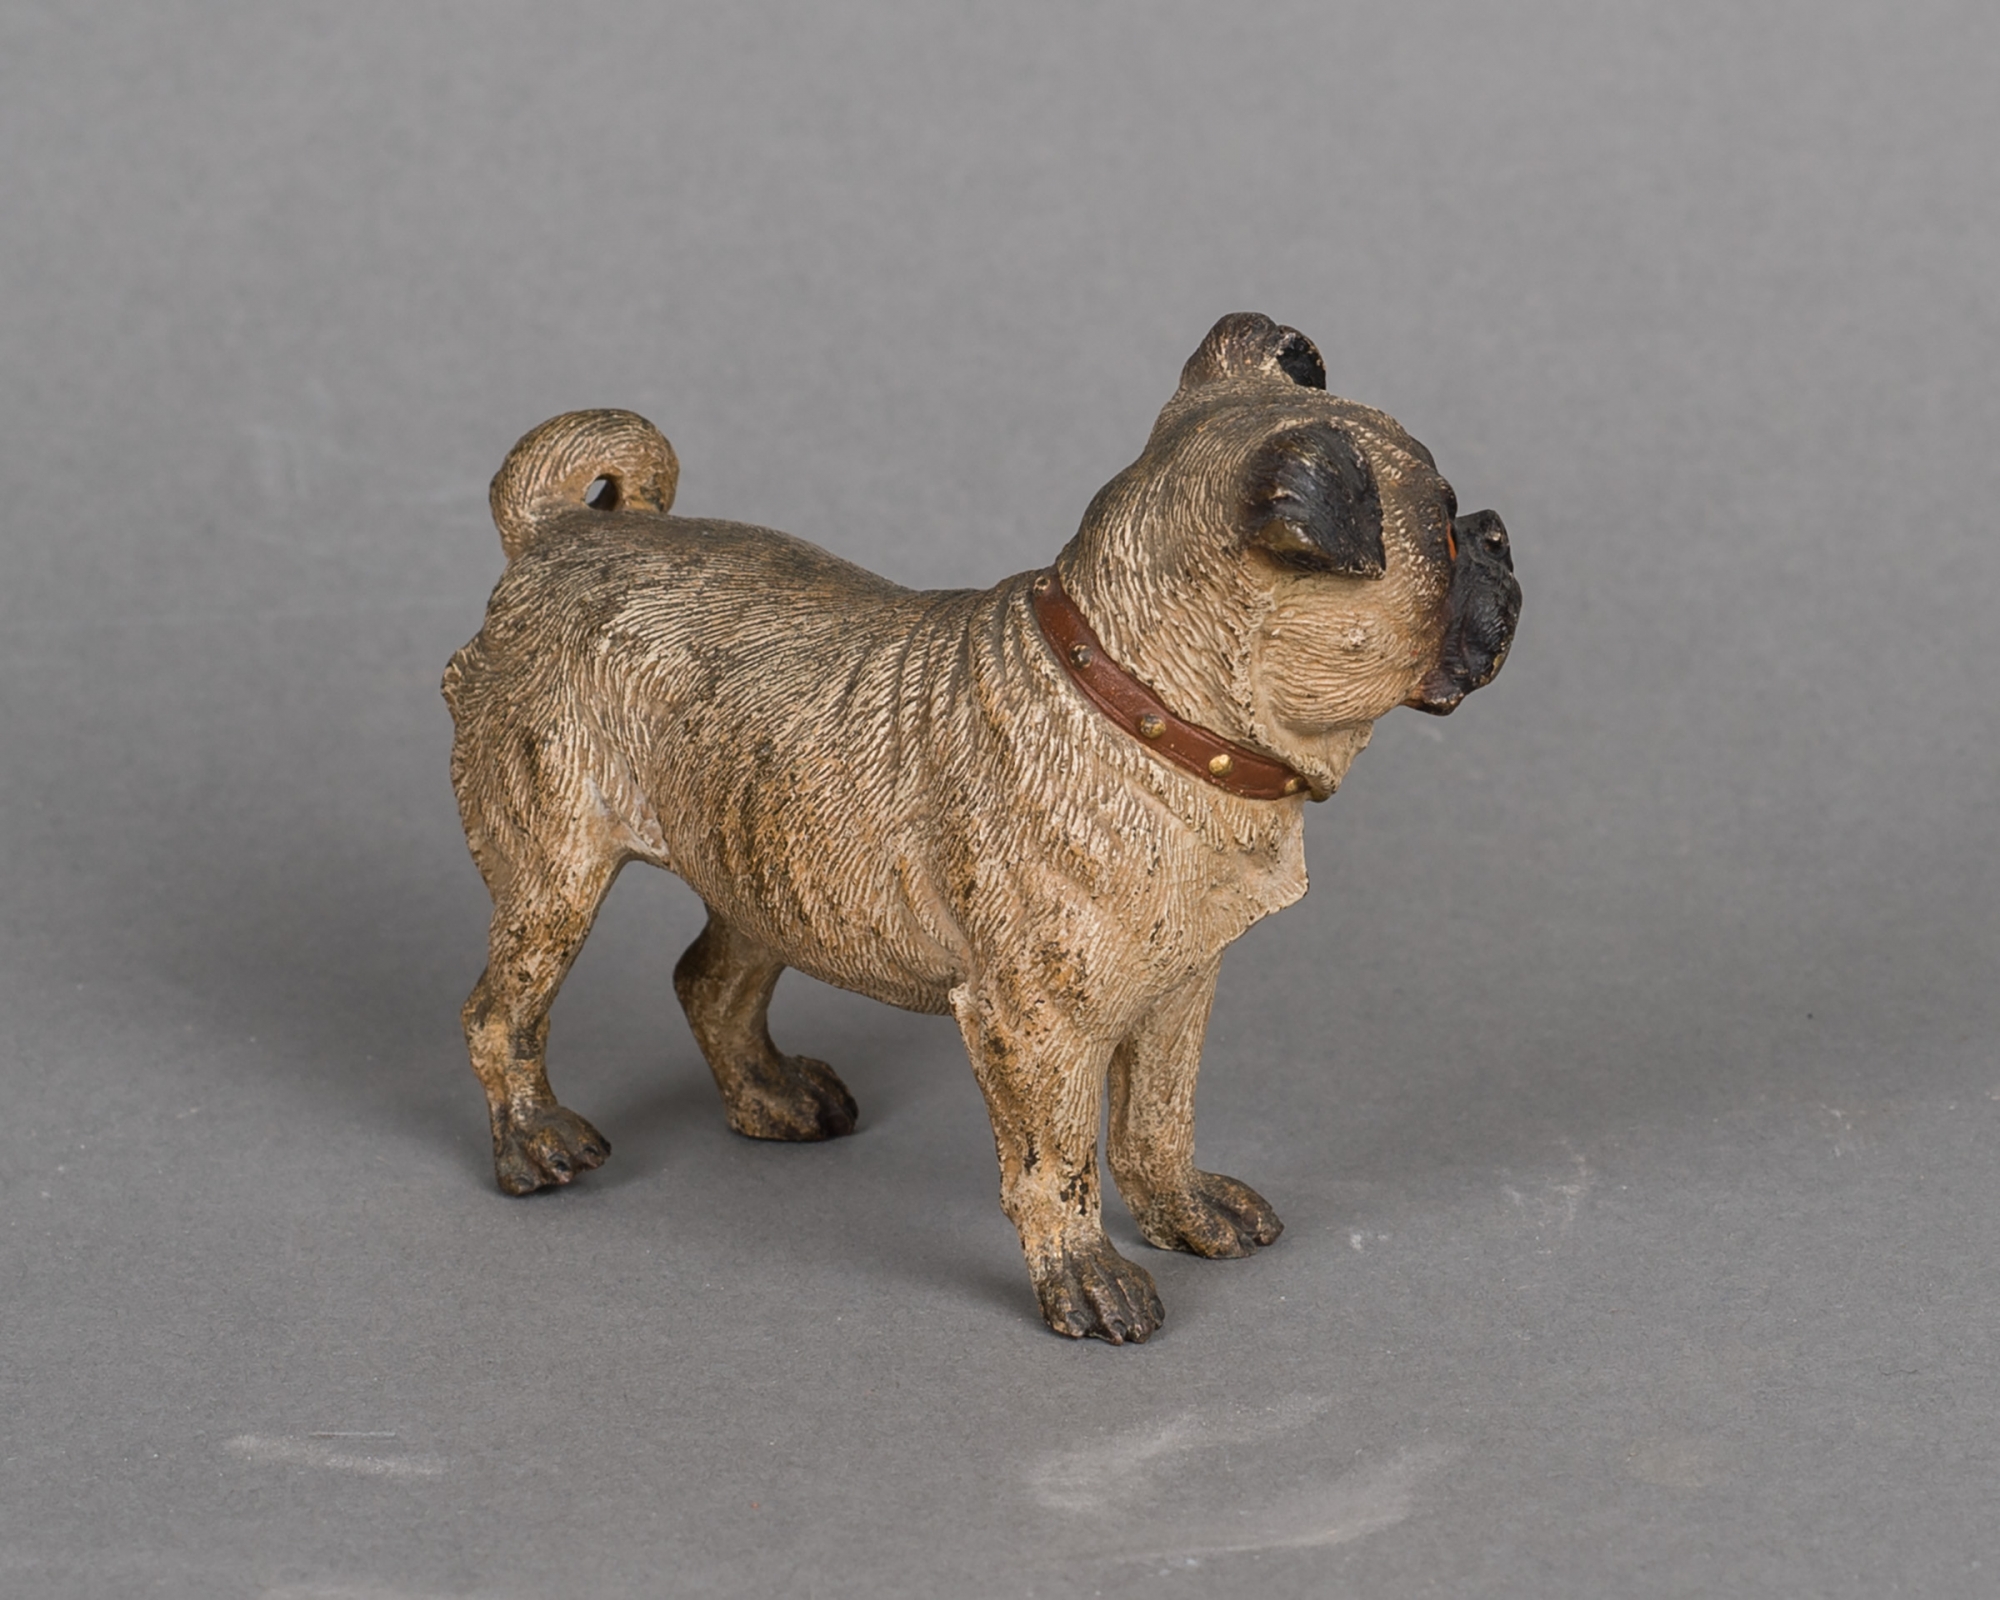 Delightful 19thC/Early 20thC Cold-Painted Bronze of a Pug With a Toothache